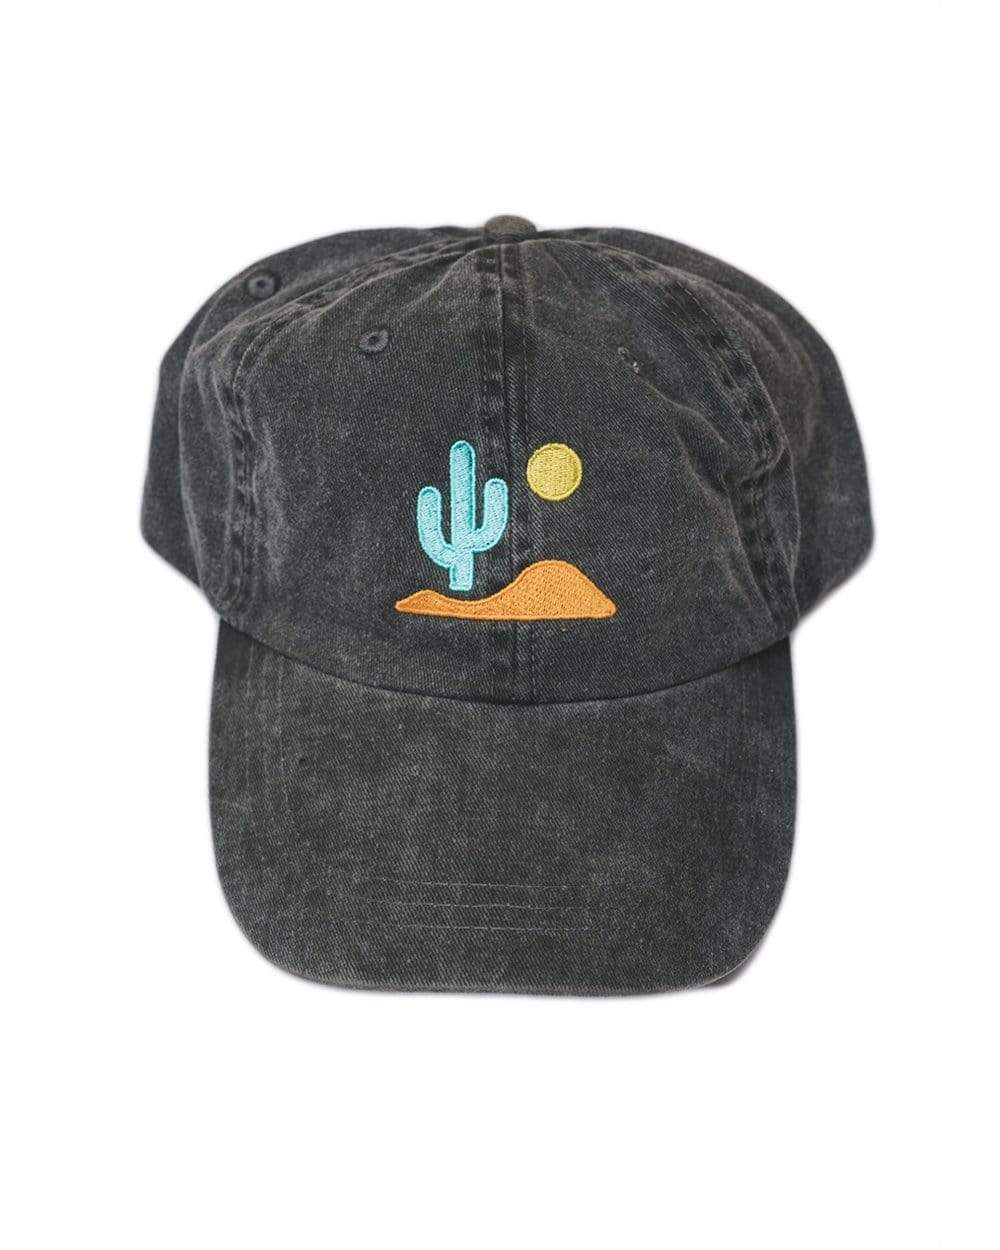 Lone Cactus Dad Hat in Faded Black